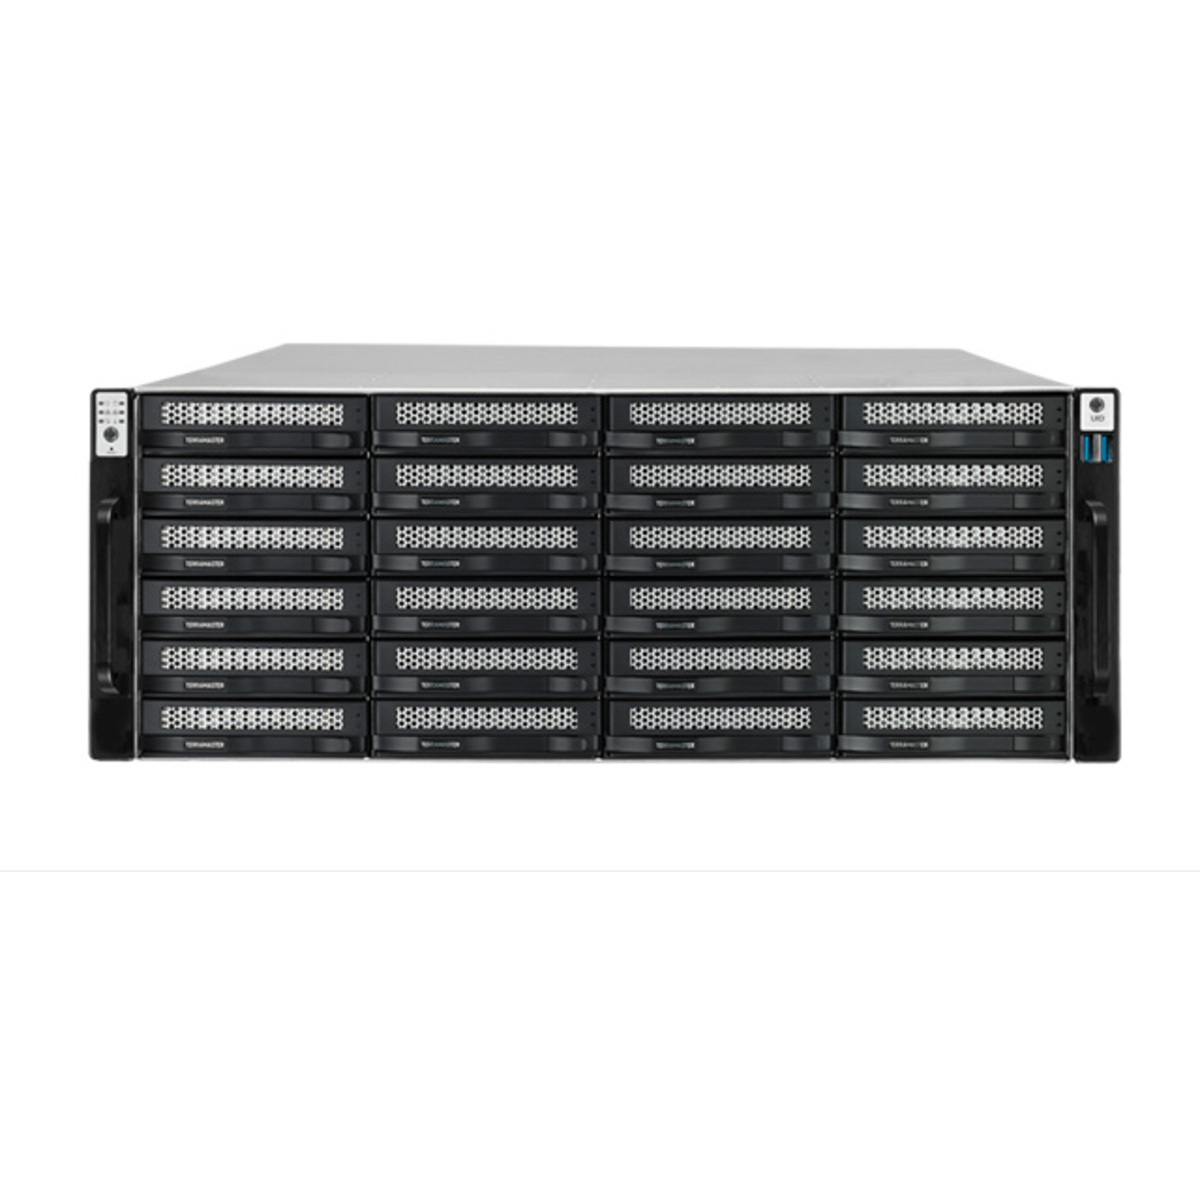 TerraMaster U24-722-2224 44tb 24-Bay RackMount Large Business / Enterprise NAS - Network Attached Storage Device 22x2tb Western Digital Red Pro WD2002FFSX 3.5 7200rpm SATA 6Gb/s HDD NAS Class Drives Installed - Burn-In Tested U24-722-2224